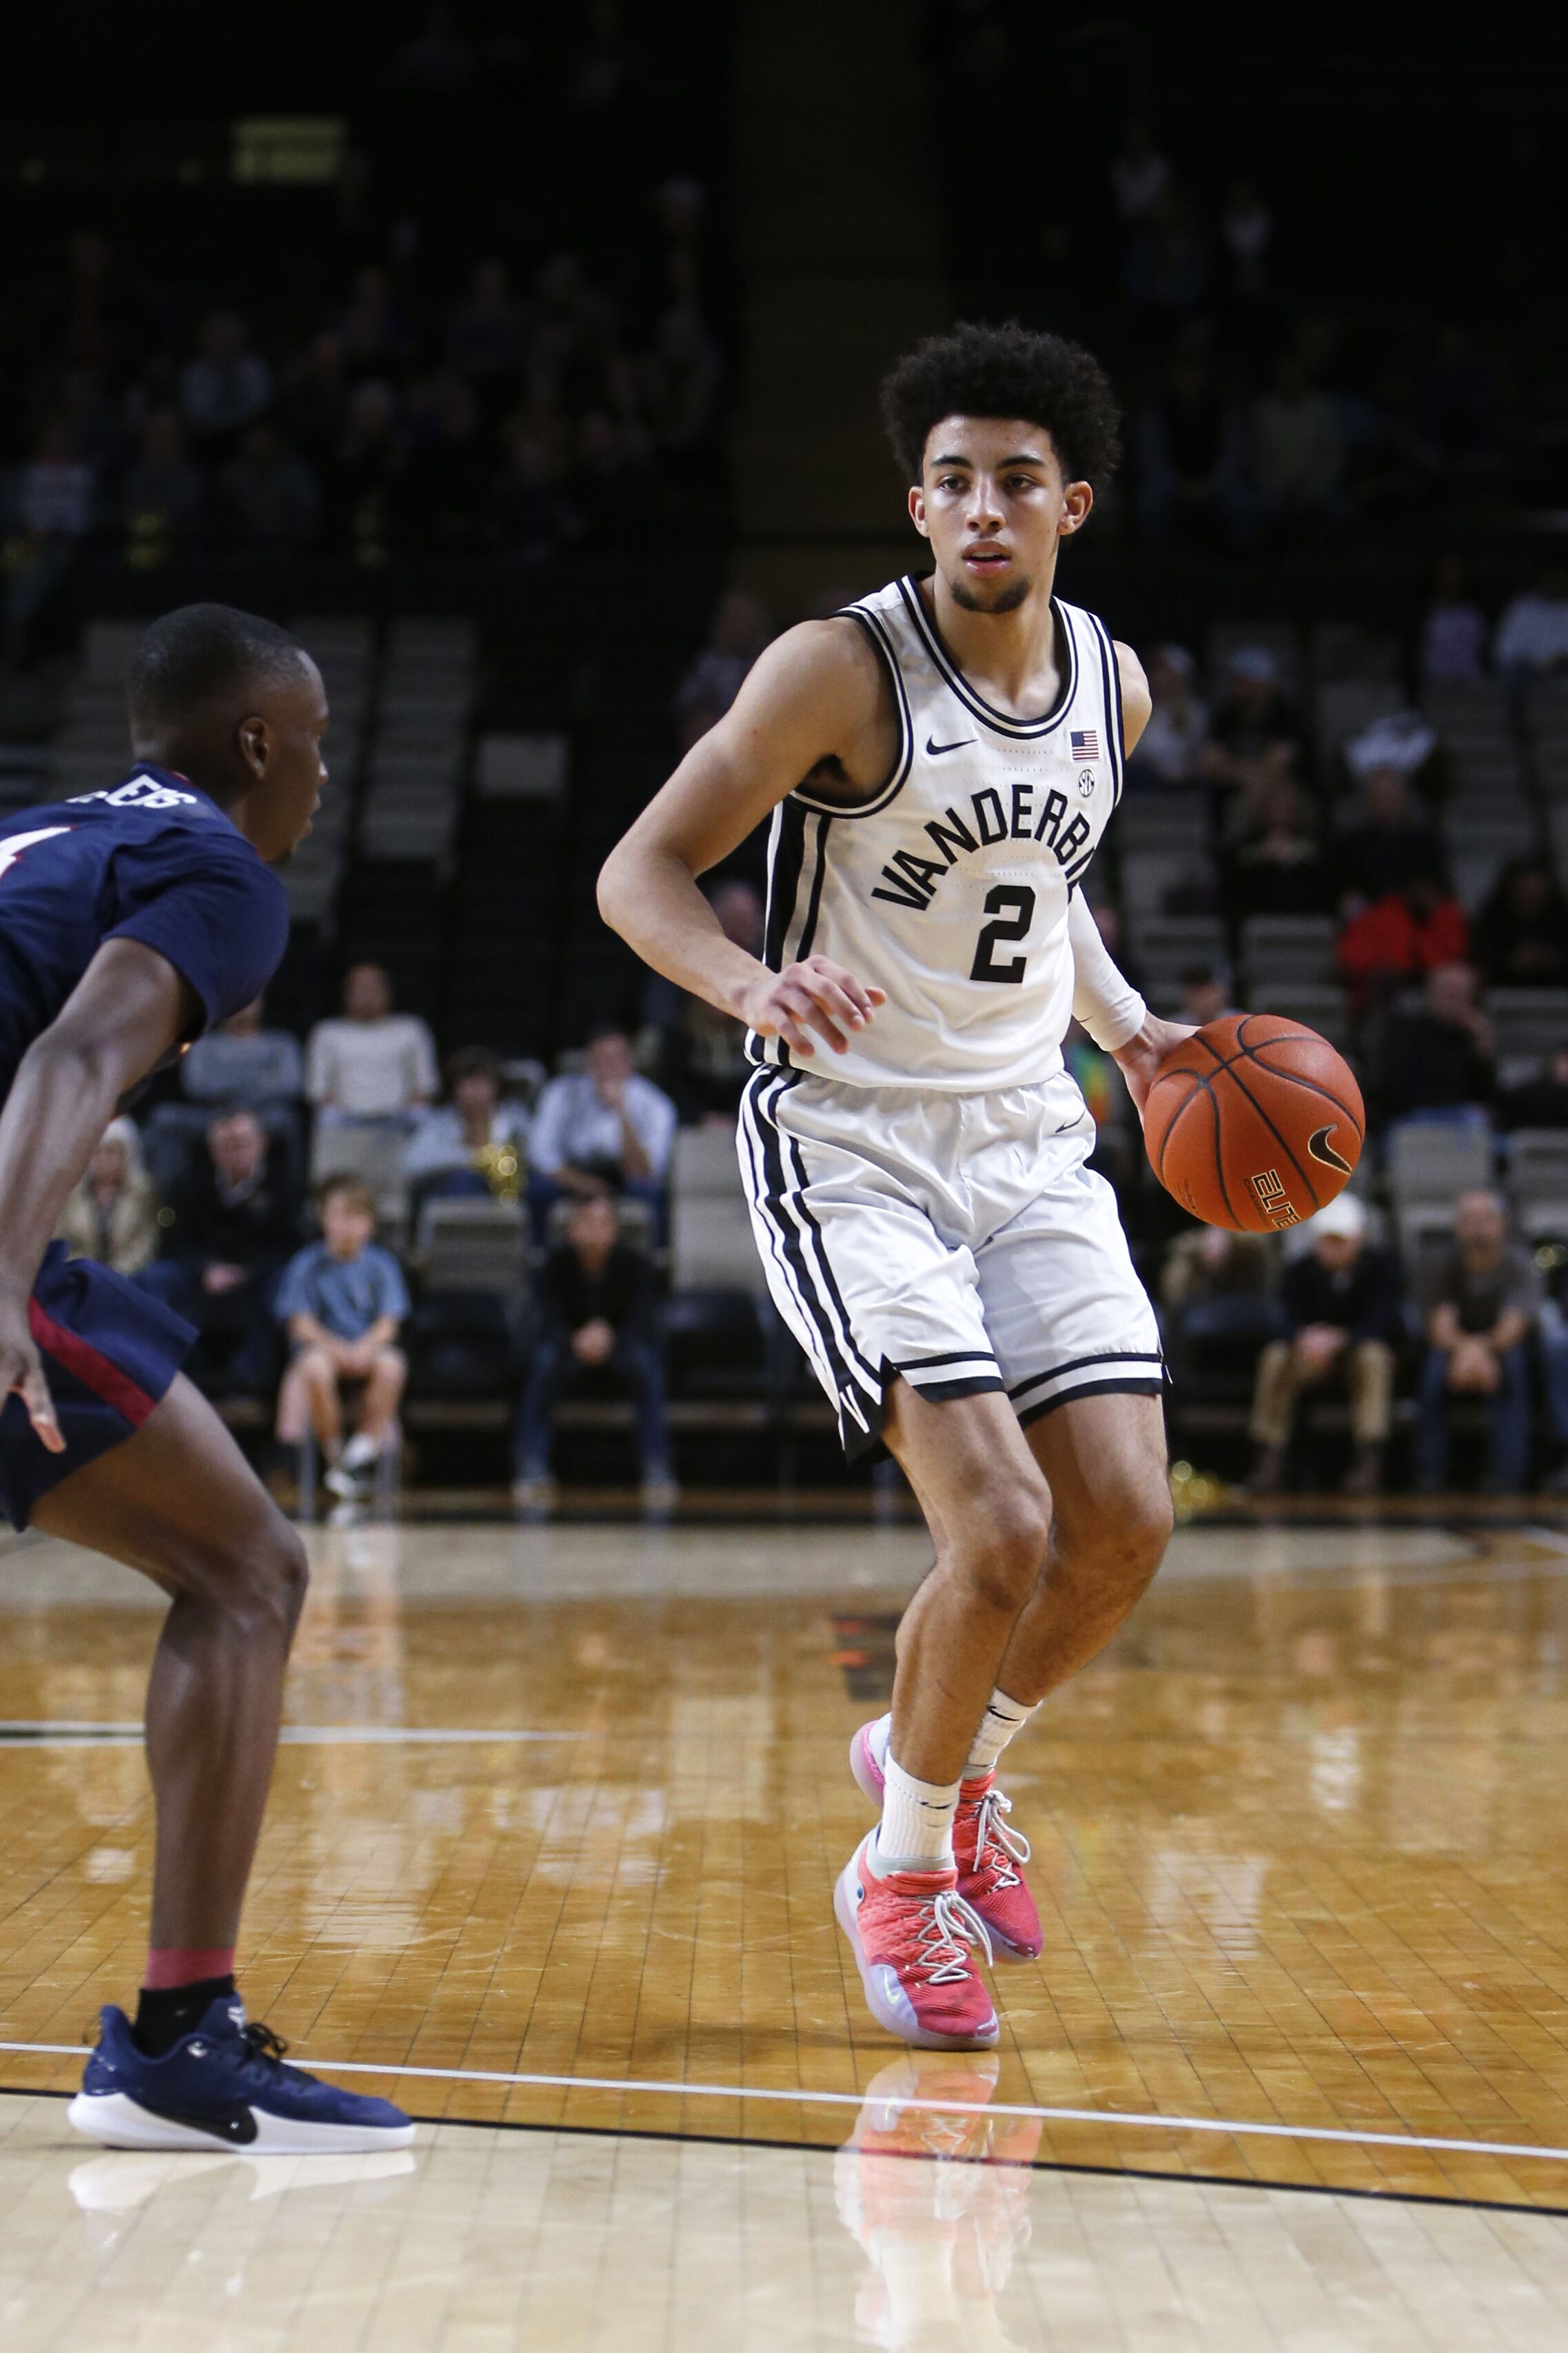 Scotty Pippen Jr. in a game between the Vanderbilt Commodores and South Carolina State Bulldogs, November 22, 2019, at Memorial Gym in Nashville, Tennessee. | Source: Getty Images